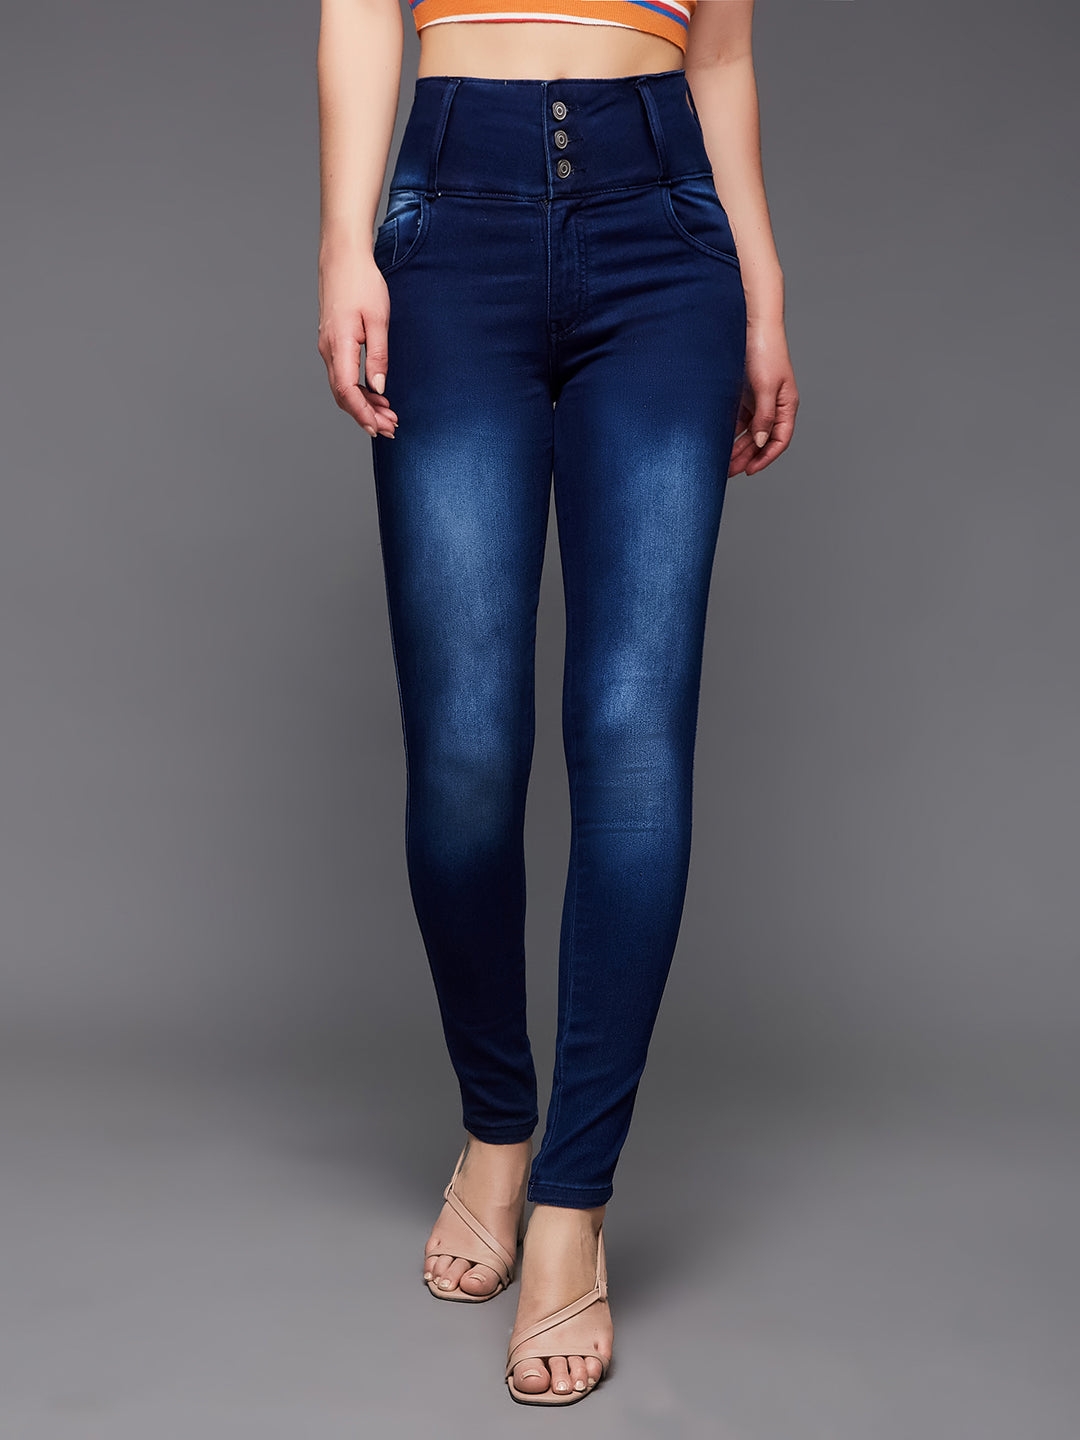 MISS CHASE | Navy Blue Skinny Fit High Rise Clean Look Regular Length Stretchable High Waist Denim Jeans